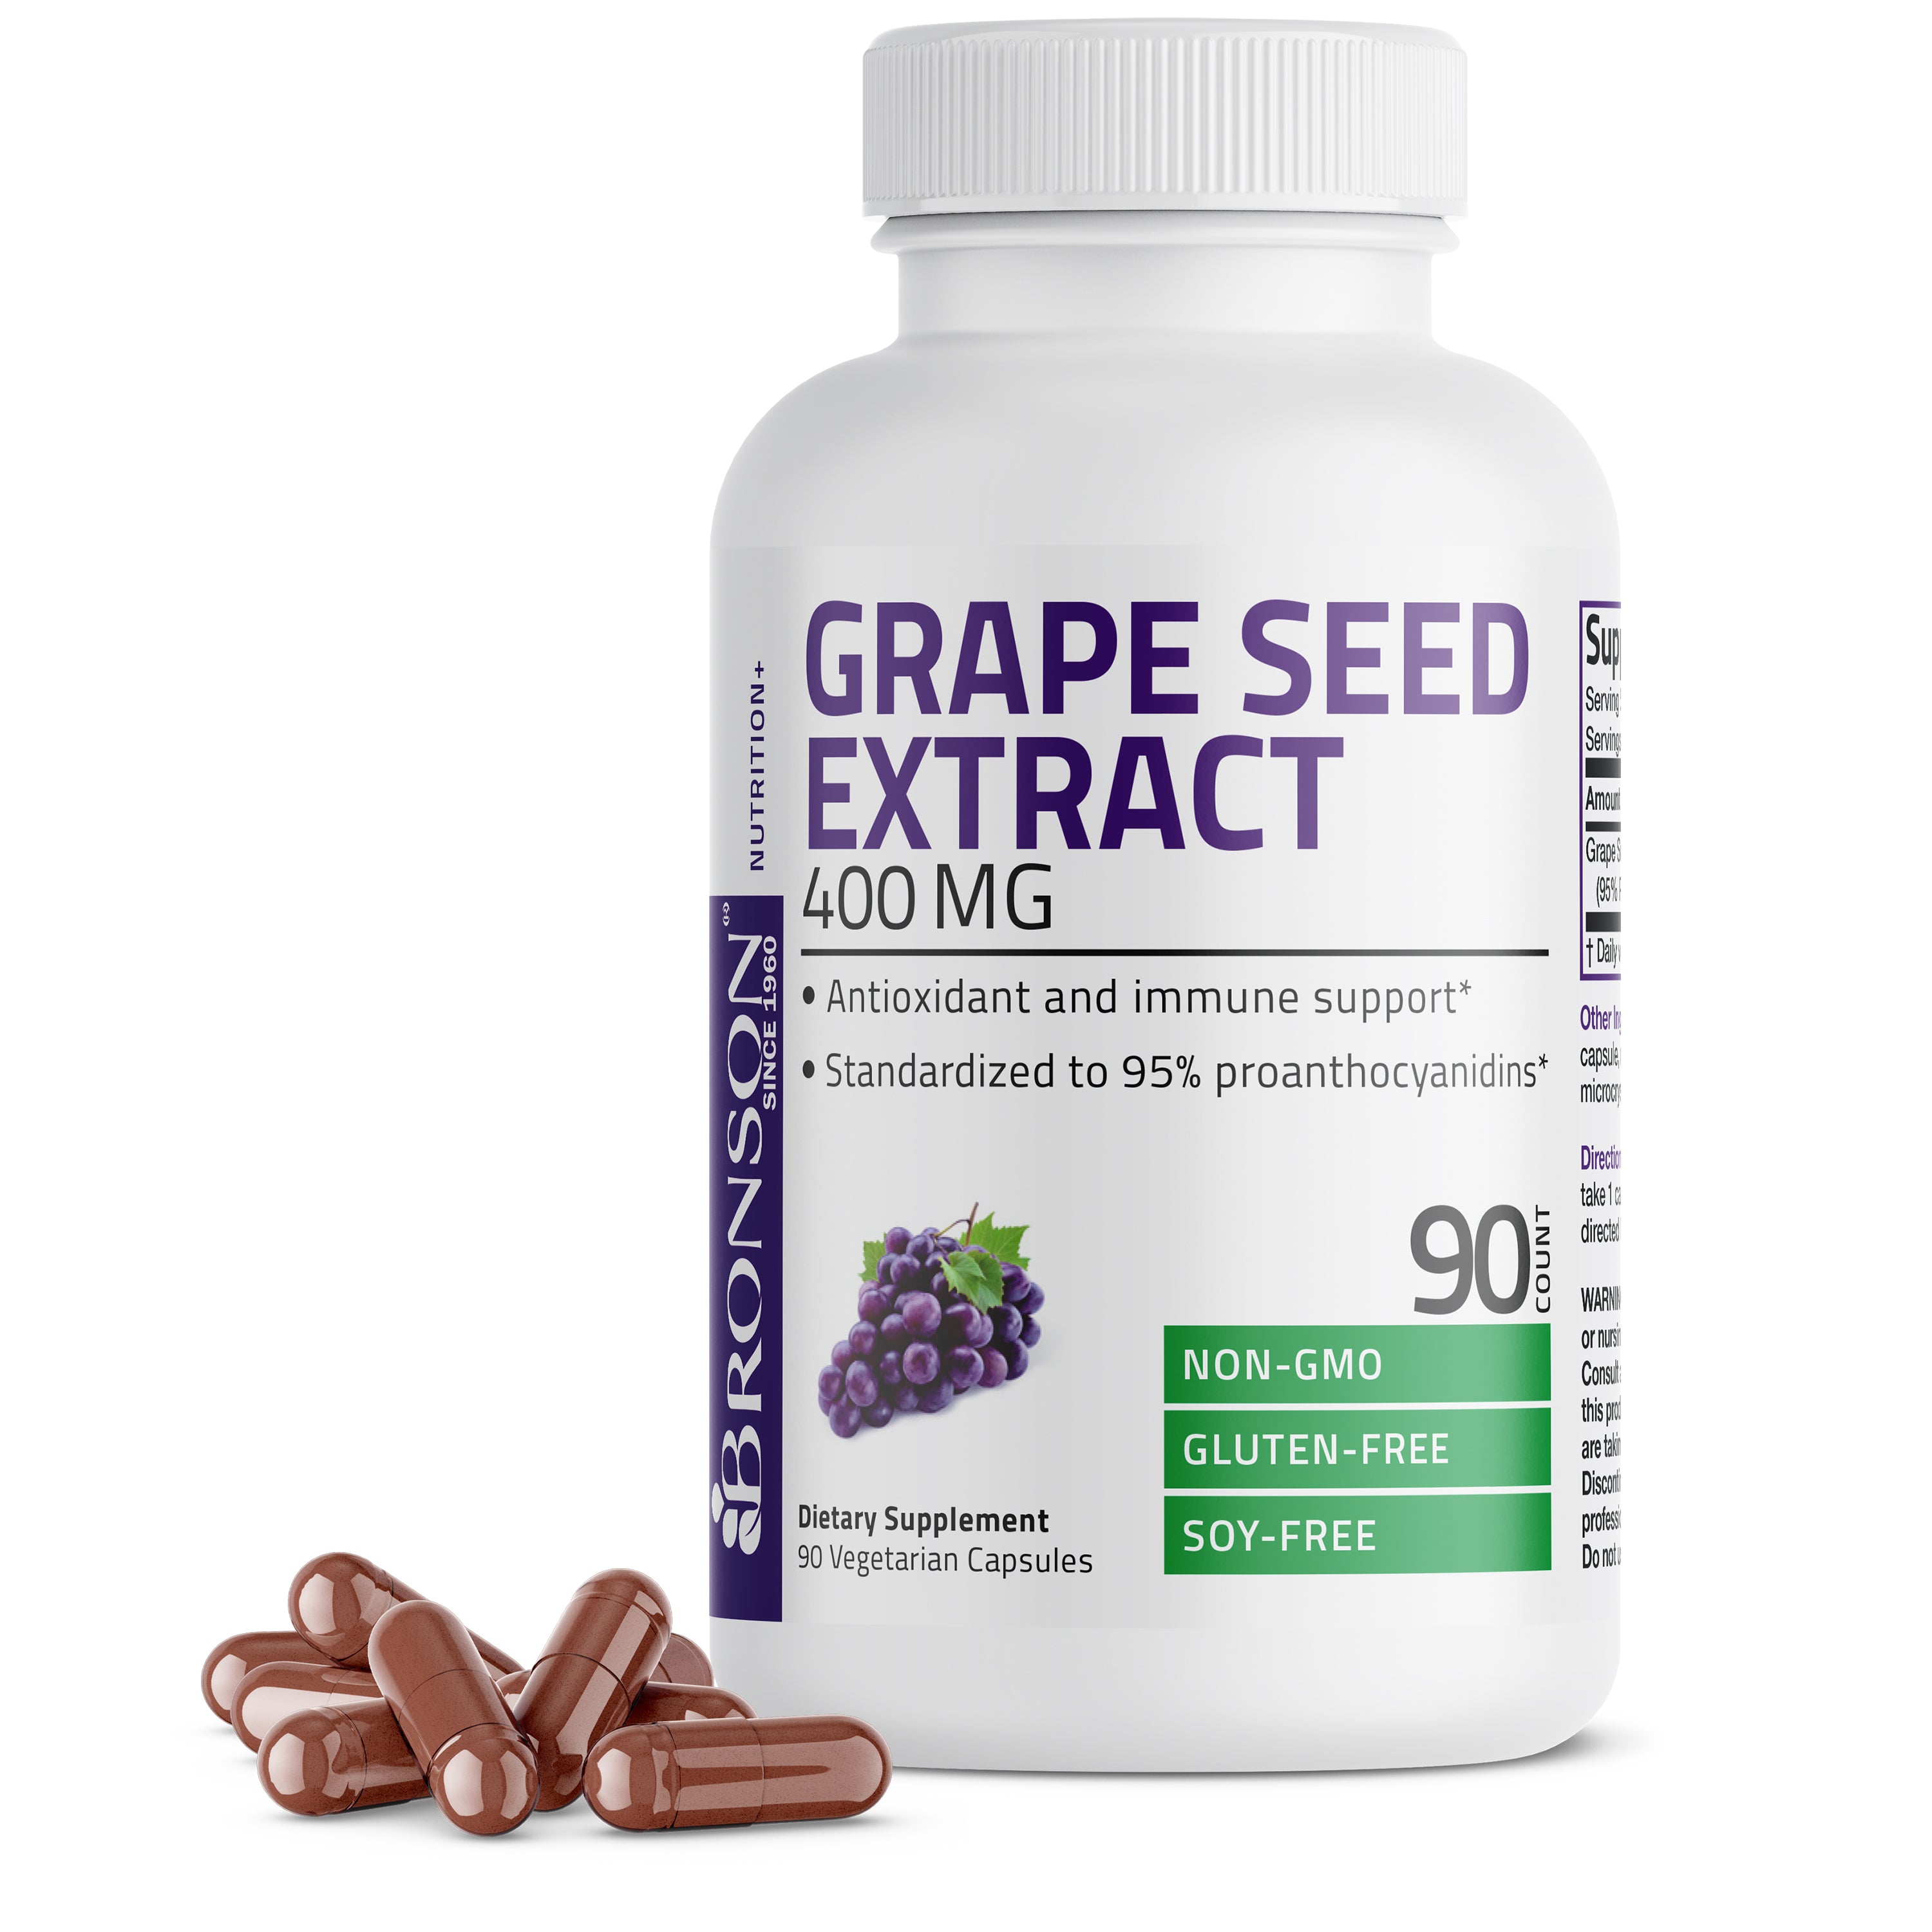 Grape Seed Extract Non-GMO - 400 mg view 7 of 6